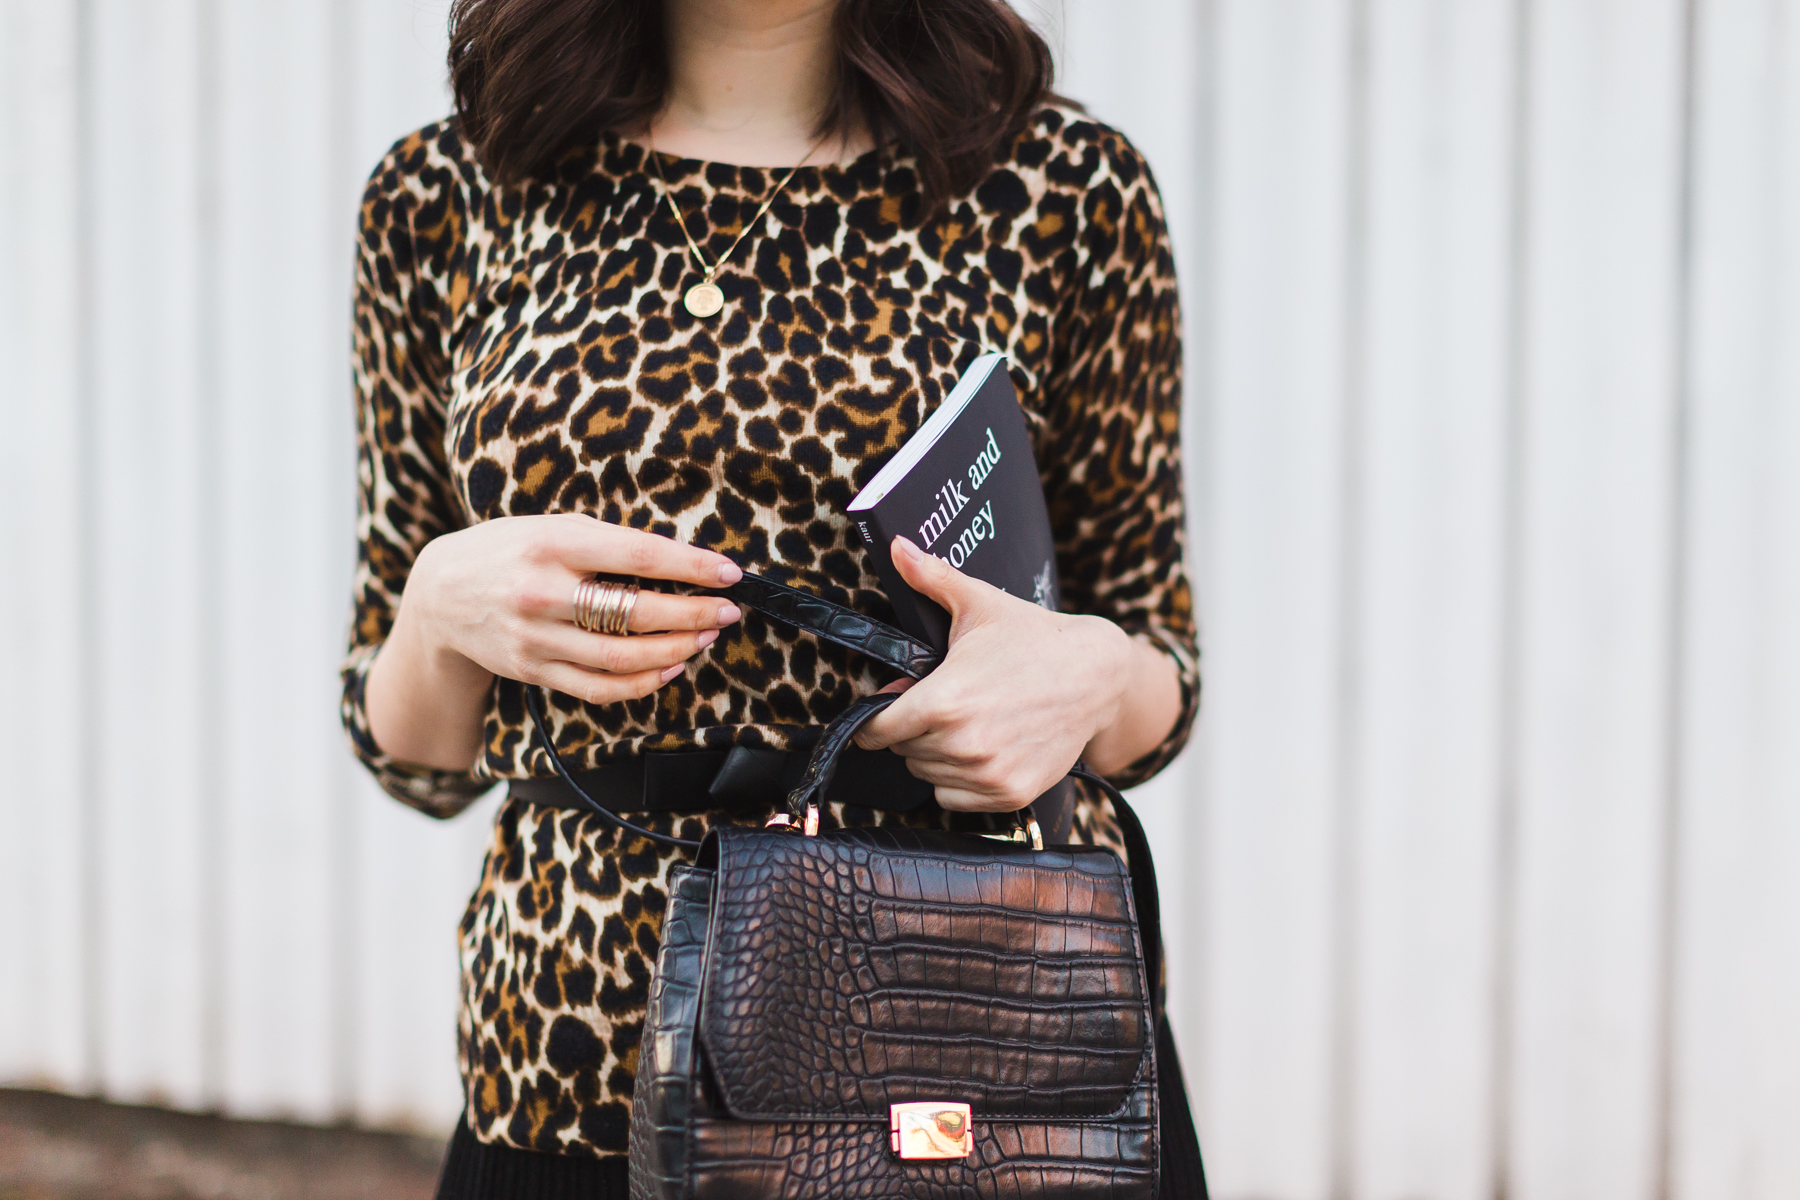 Yana Frigelis of NoMad Luxuries wearing a leopard sweater from Jcrew and a midi length skirt from mango for a classic look